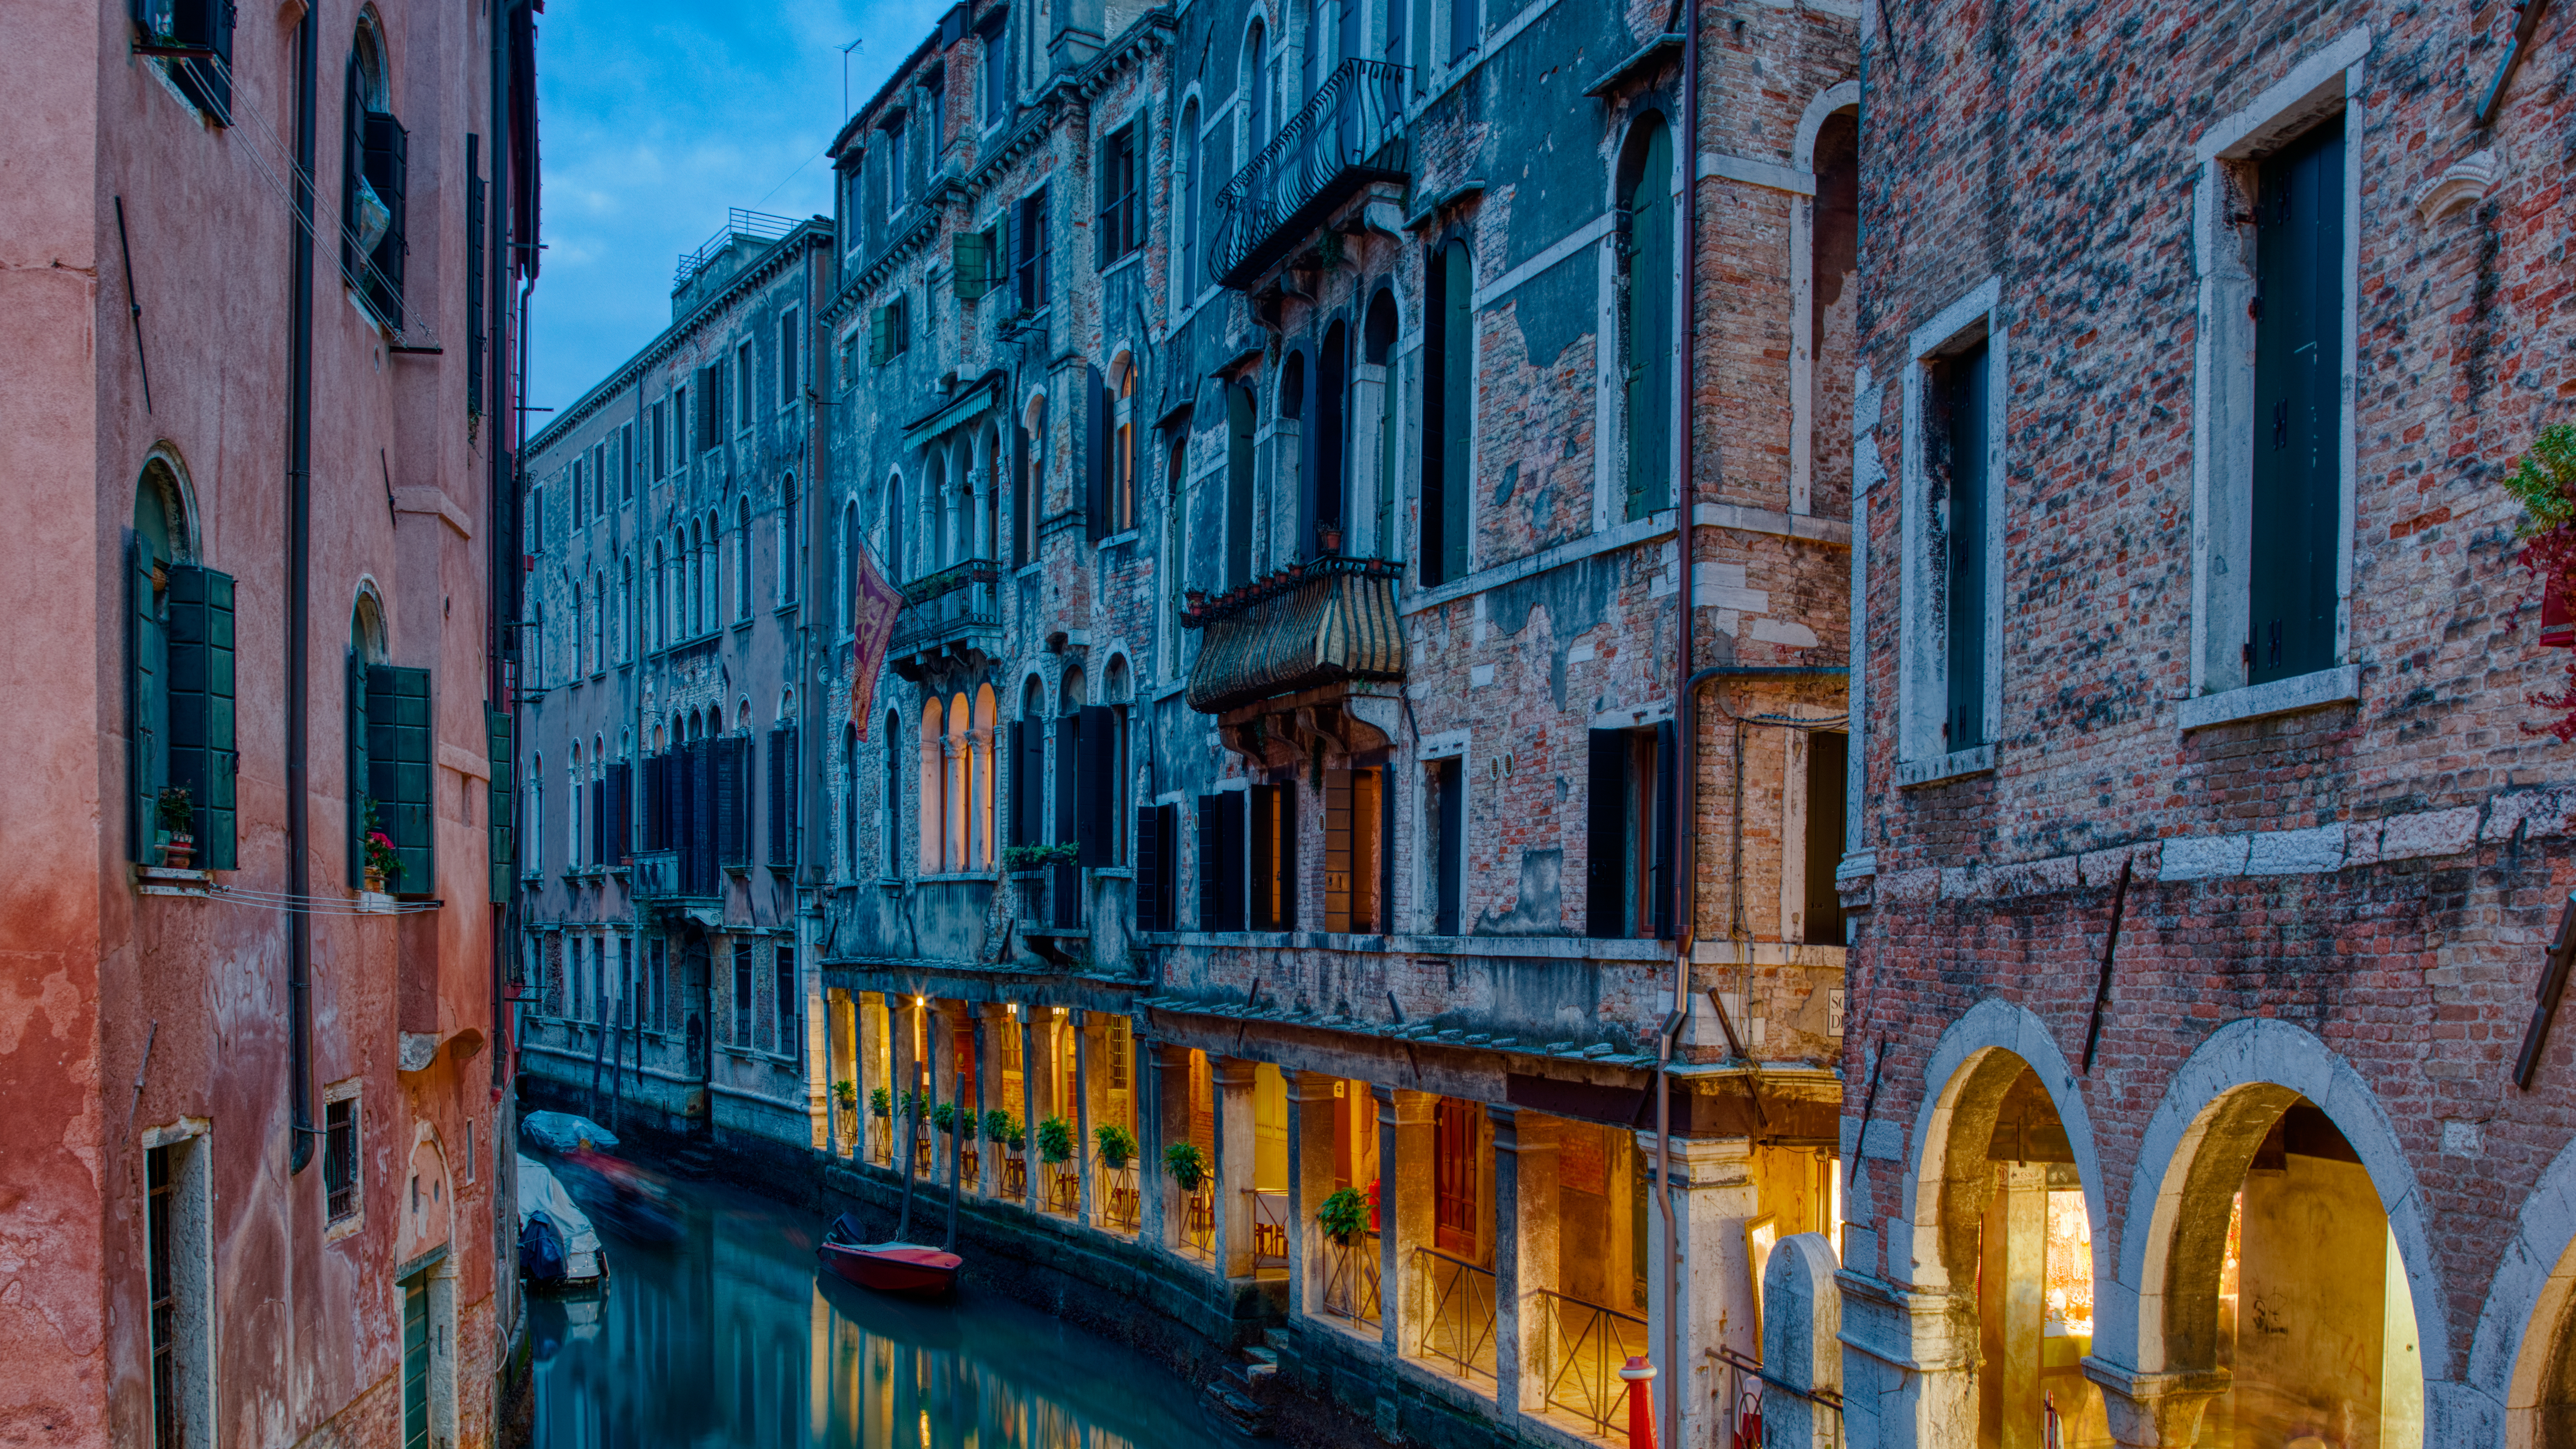 General 7680x4320 Trey Ratcliff photography building water boat Italy Venice